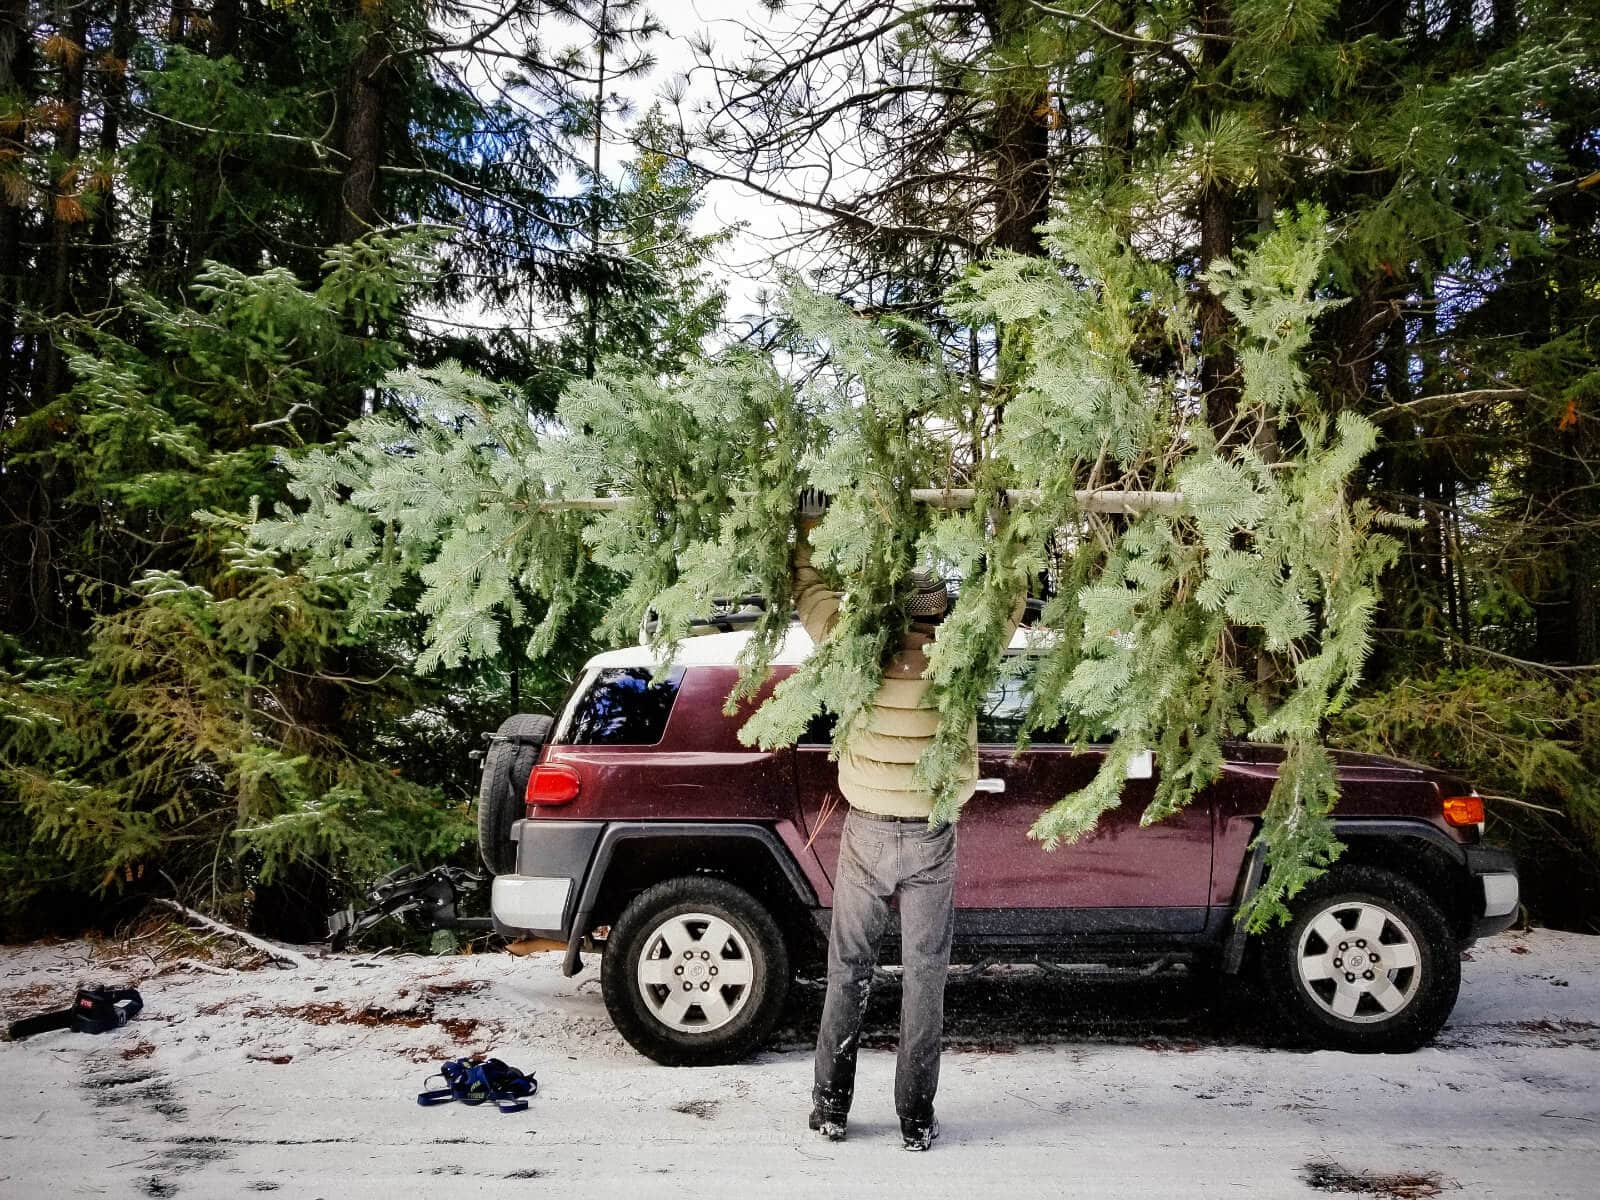 This year's Christmas tree from Deschutes National Forest